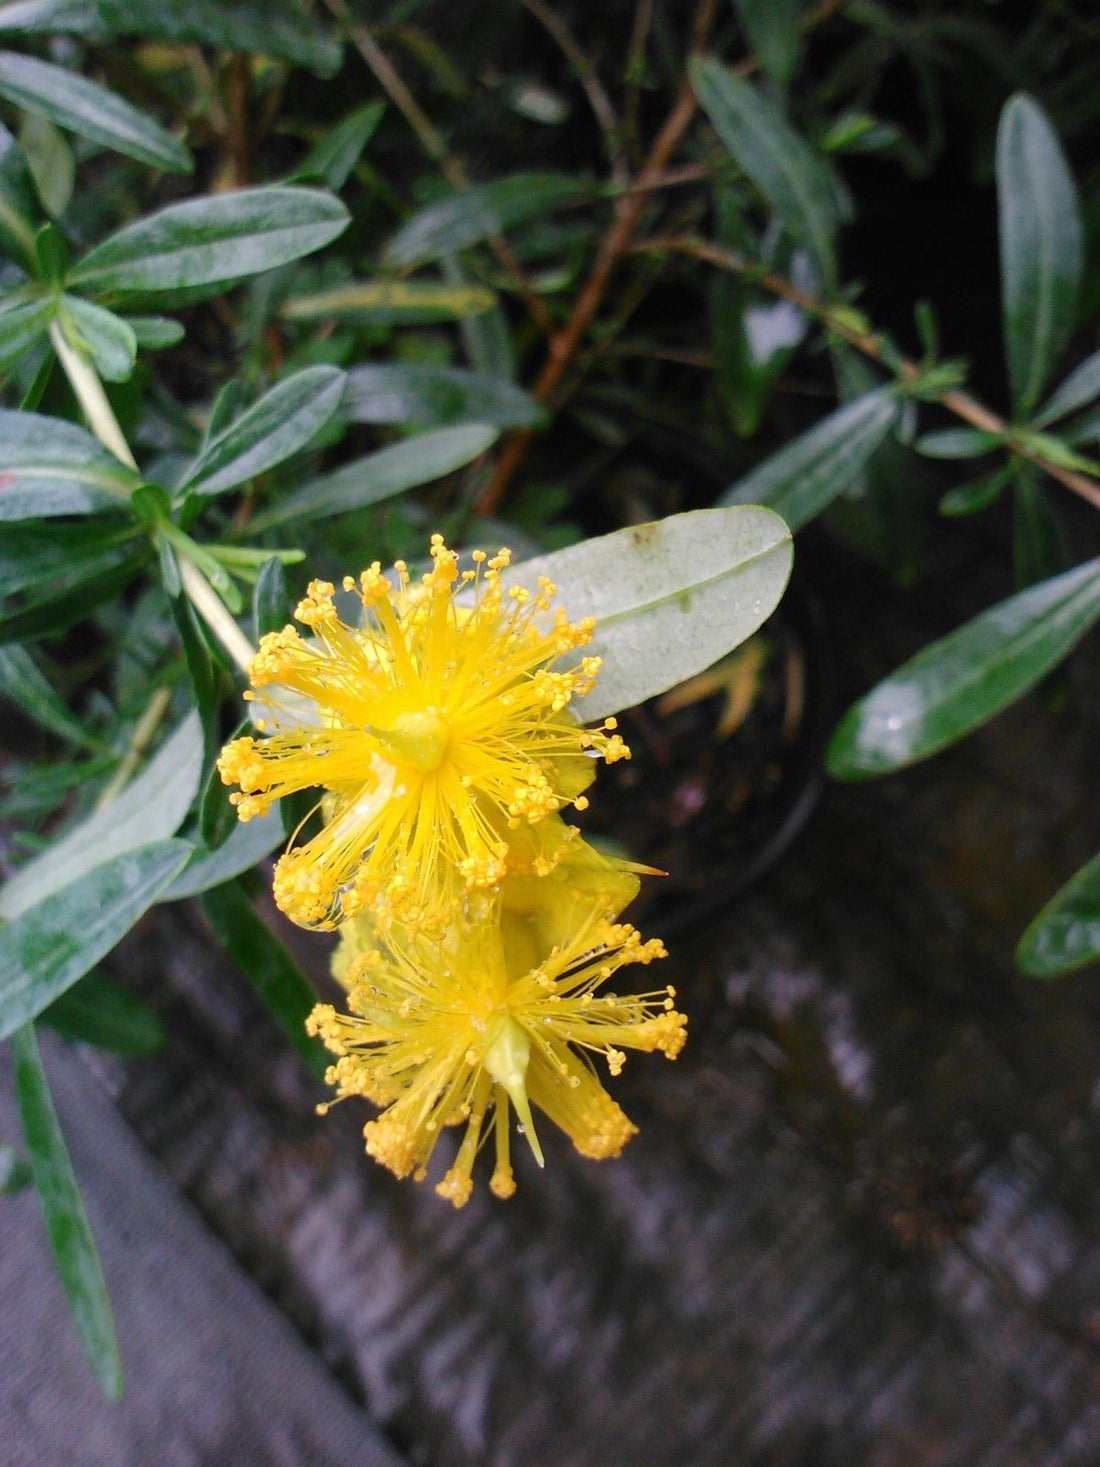 (1 Gallon) Creels Gold, St Johns Wort, Lots of Yellow Flowers, Native Variety